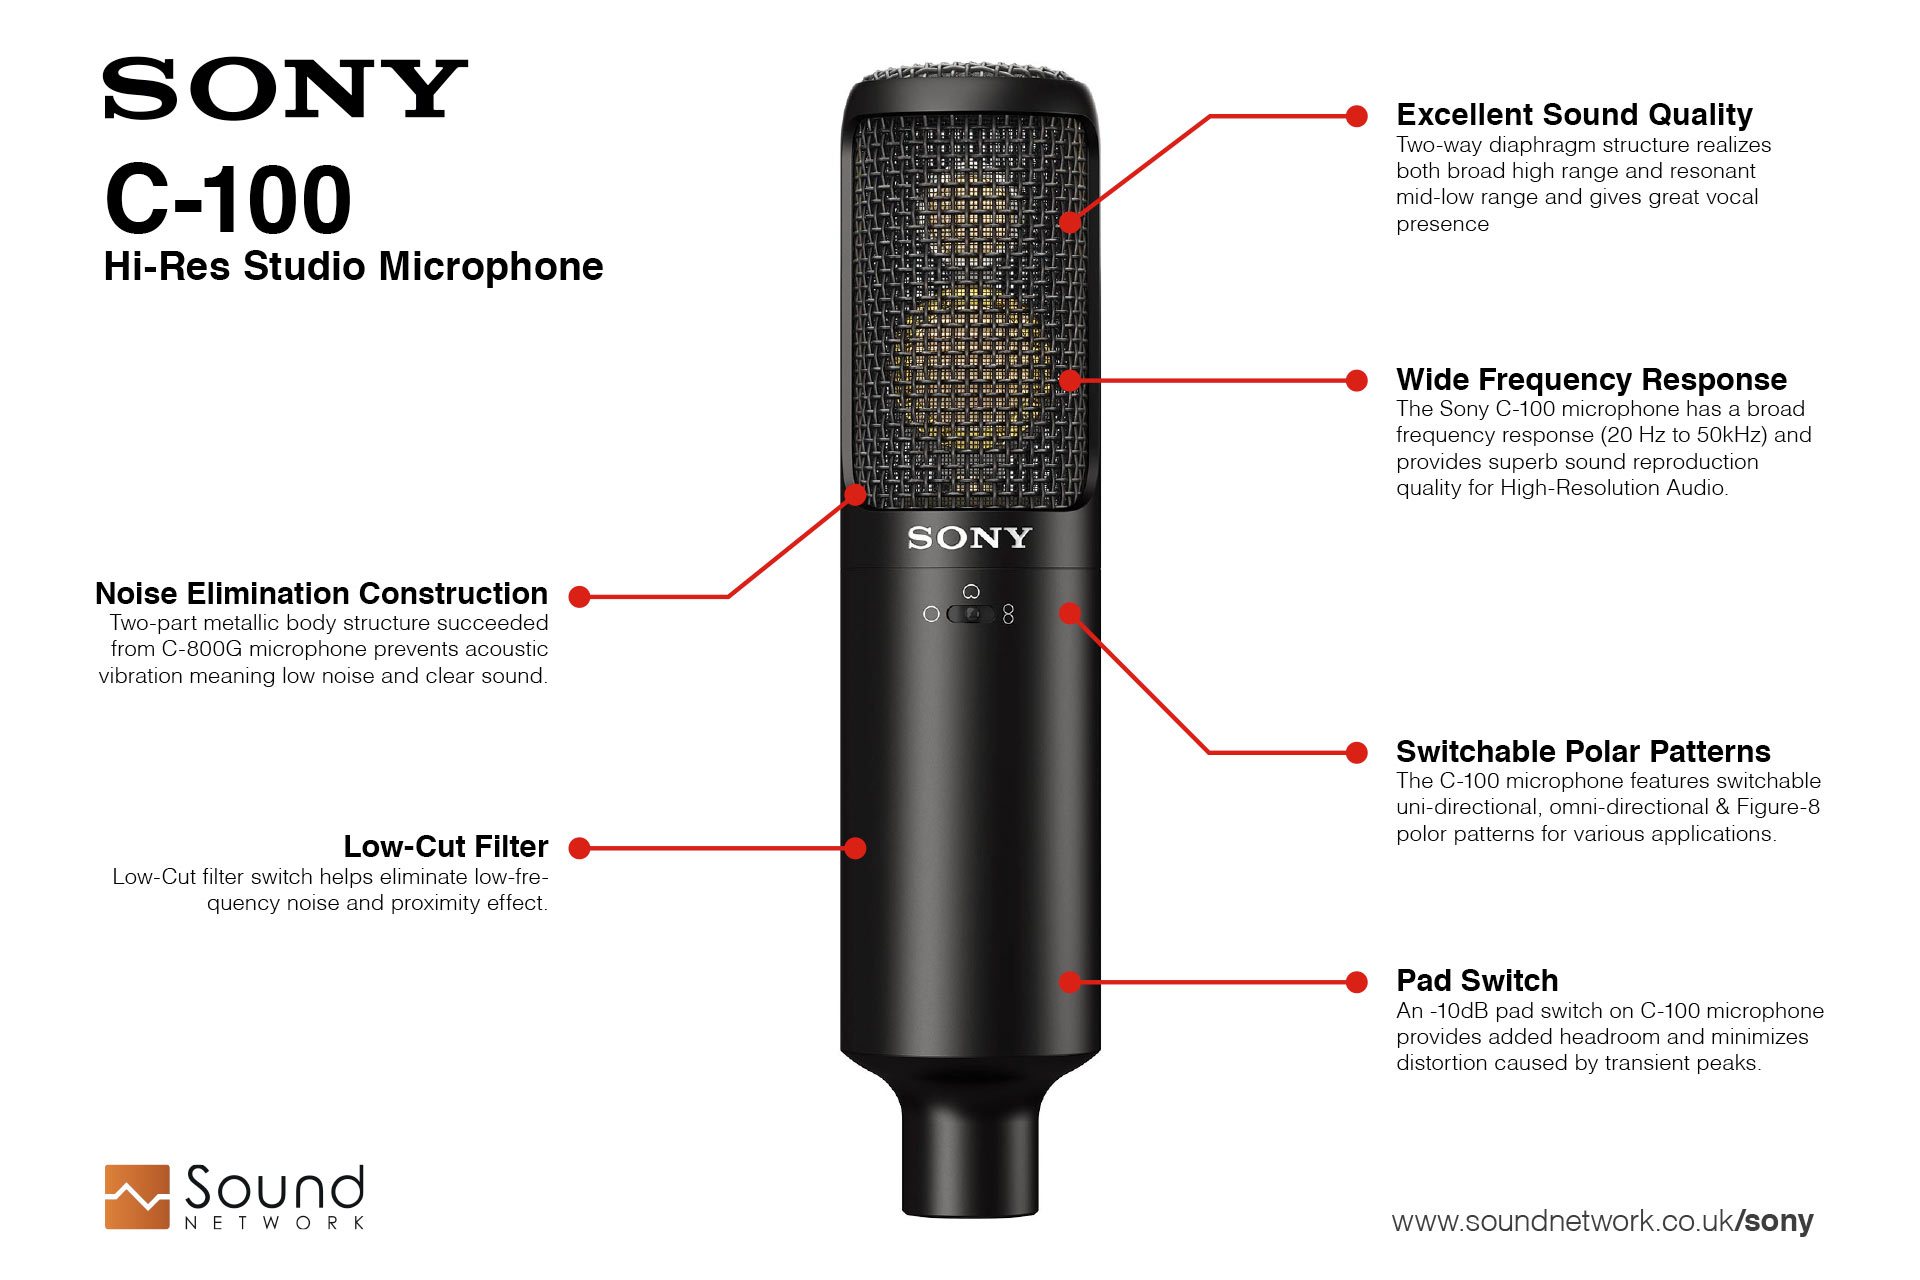 New Sony Studio Microphones Announced at AES | Sound Network